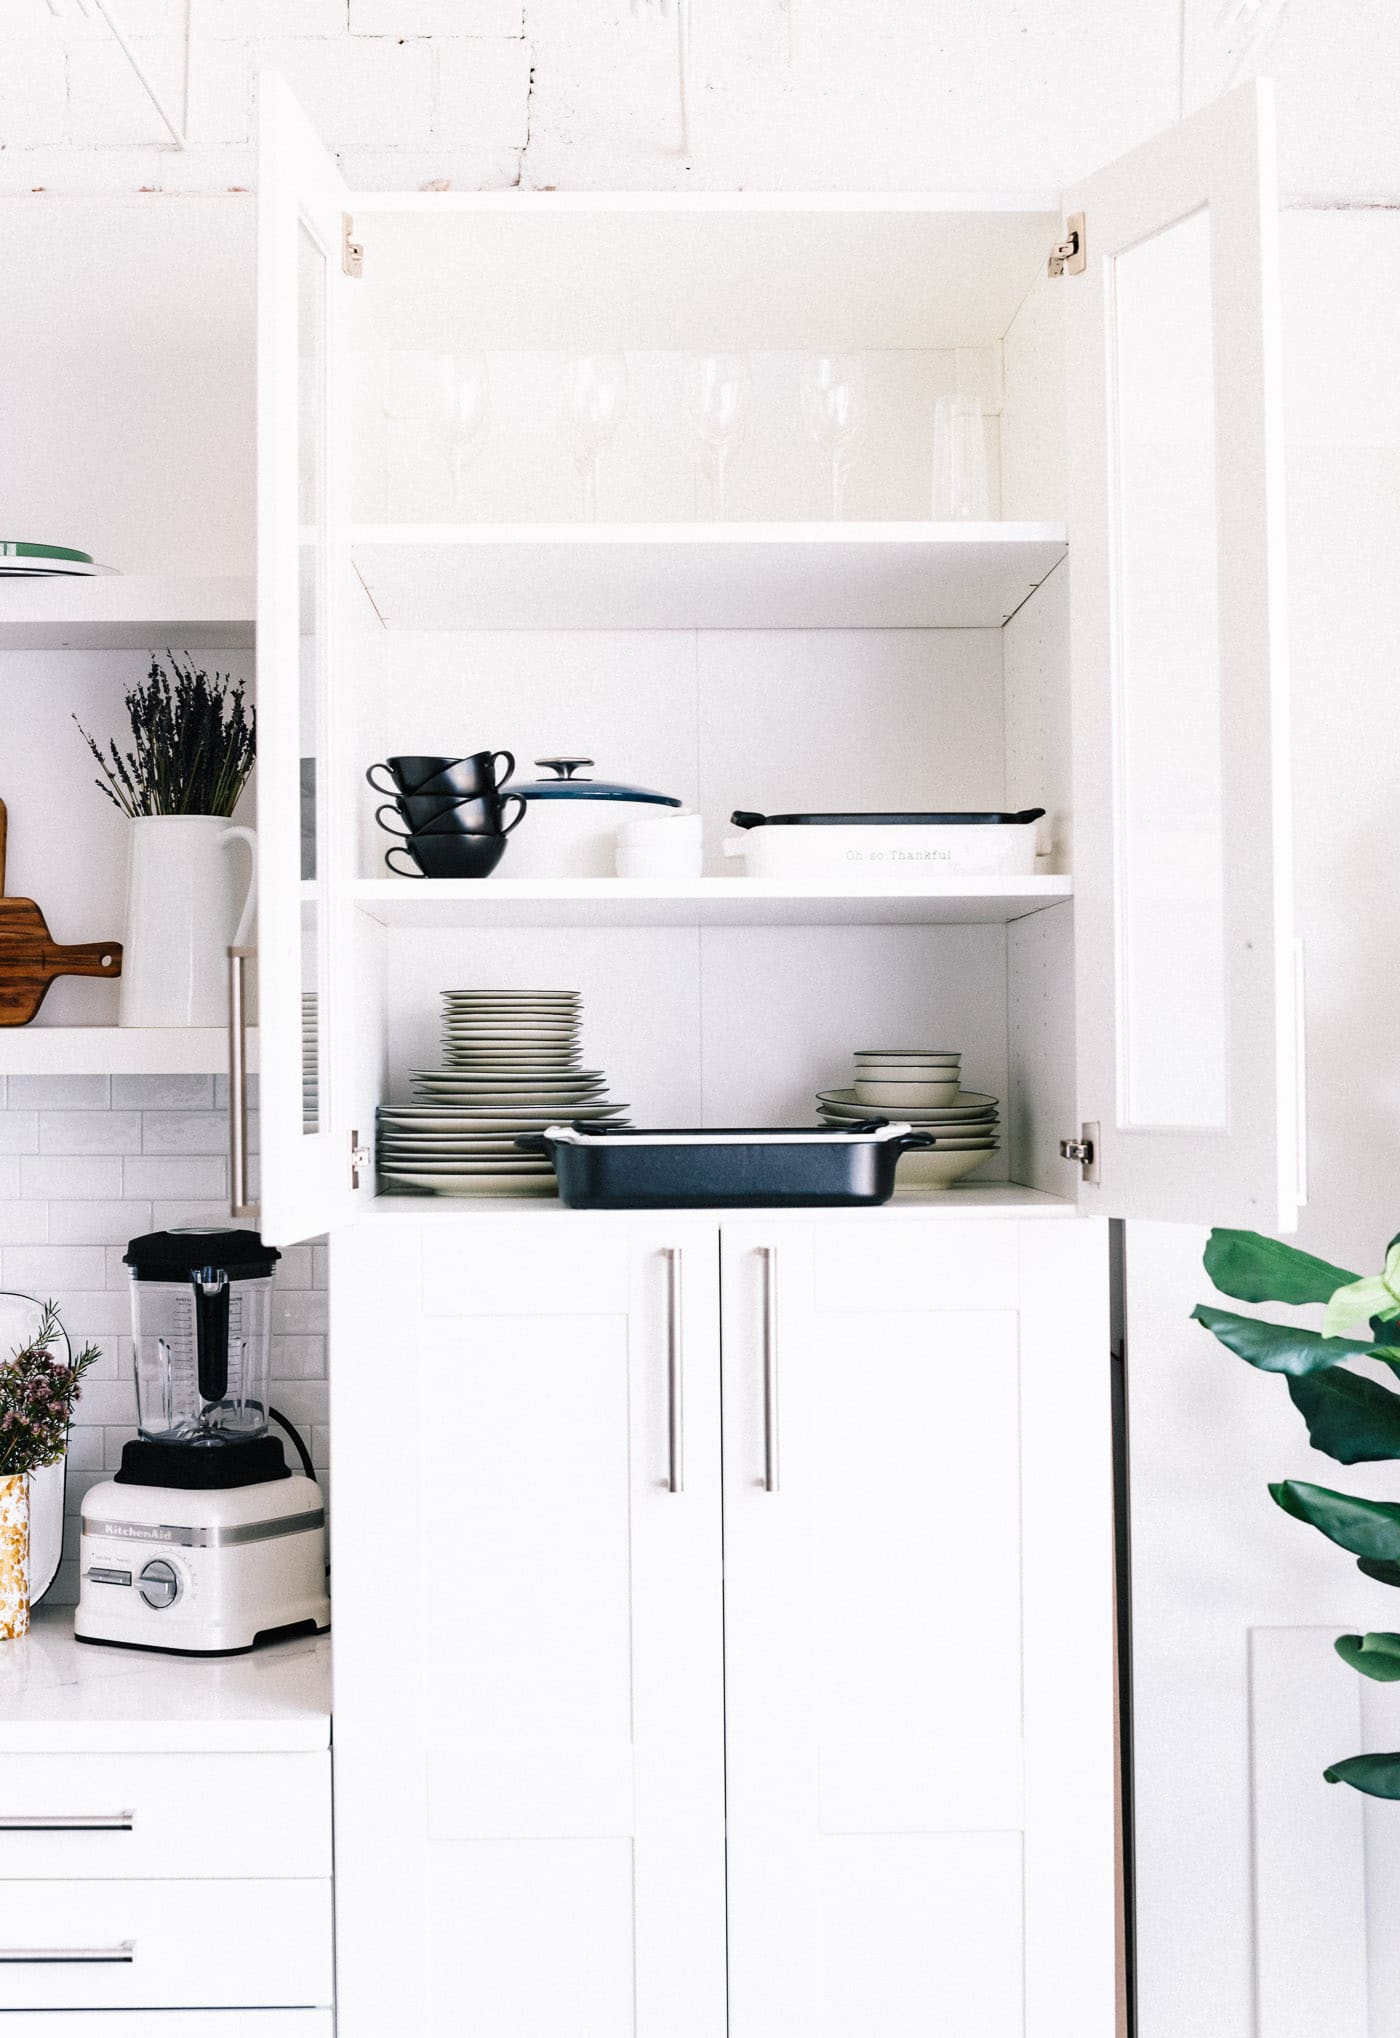 Cotter Crunch Kitchen with white cupboards filled with kitchen items